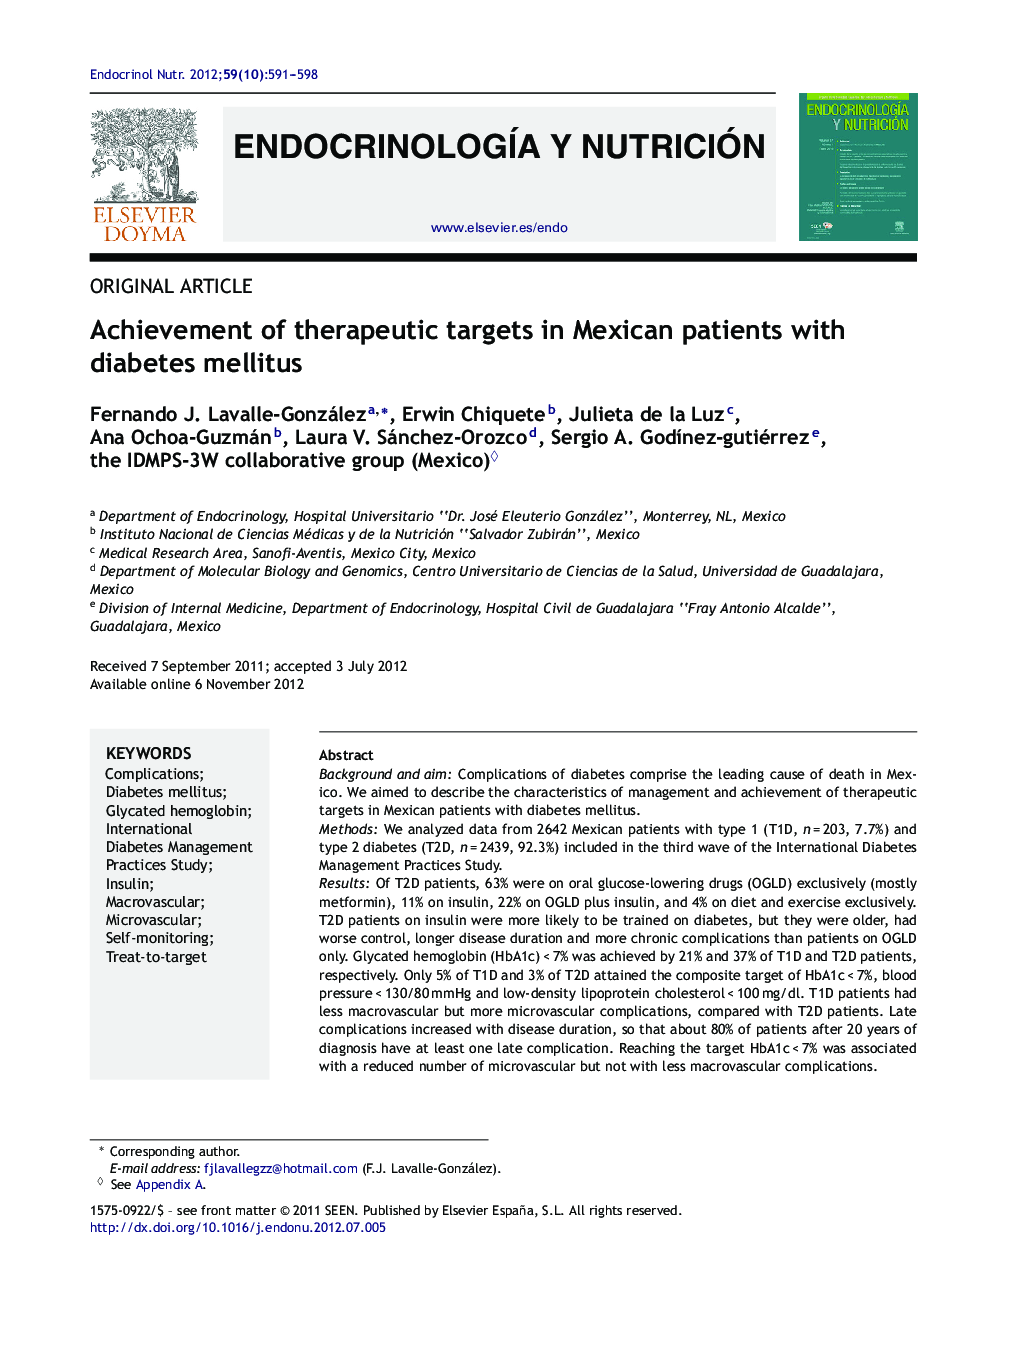 Achievement of therapeutic targets in Mexican patients with diabetes mellitus